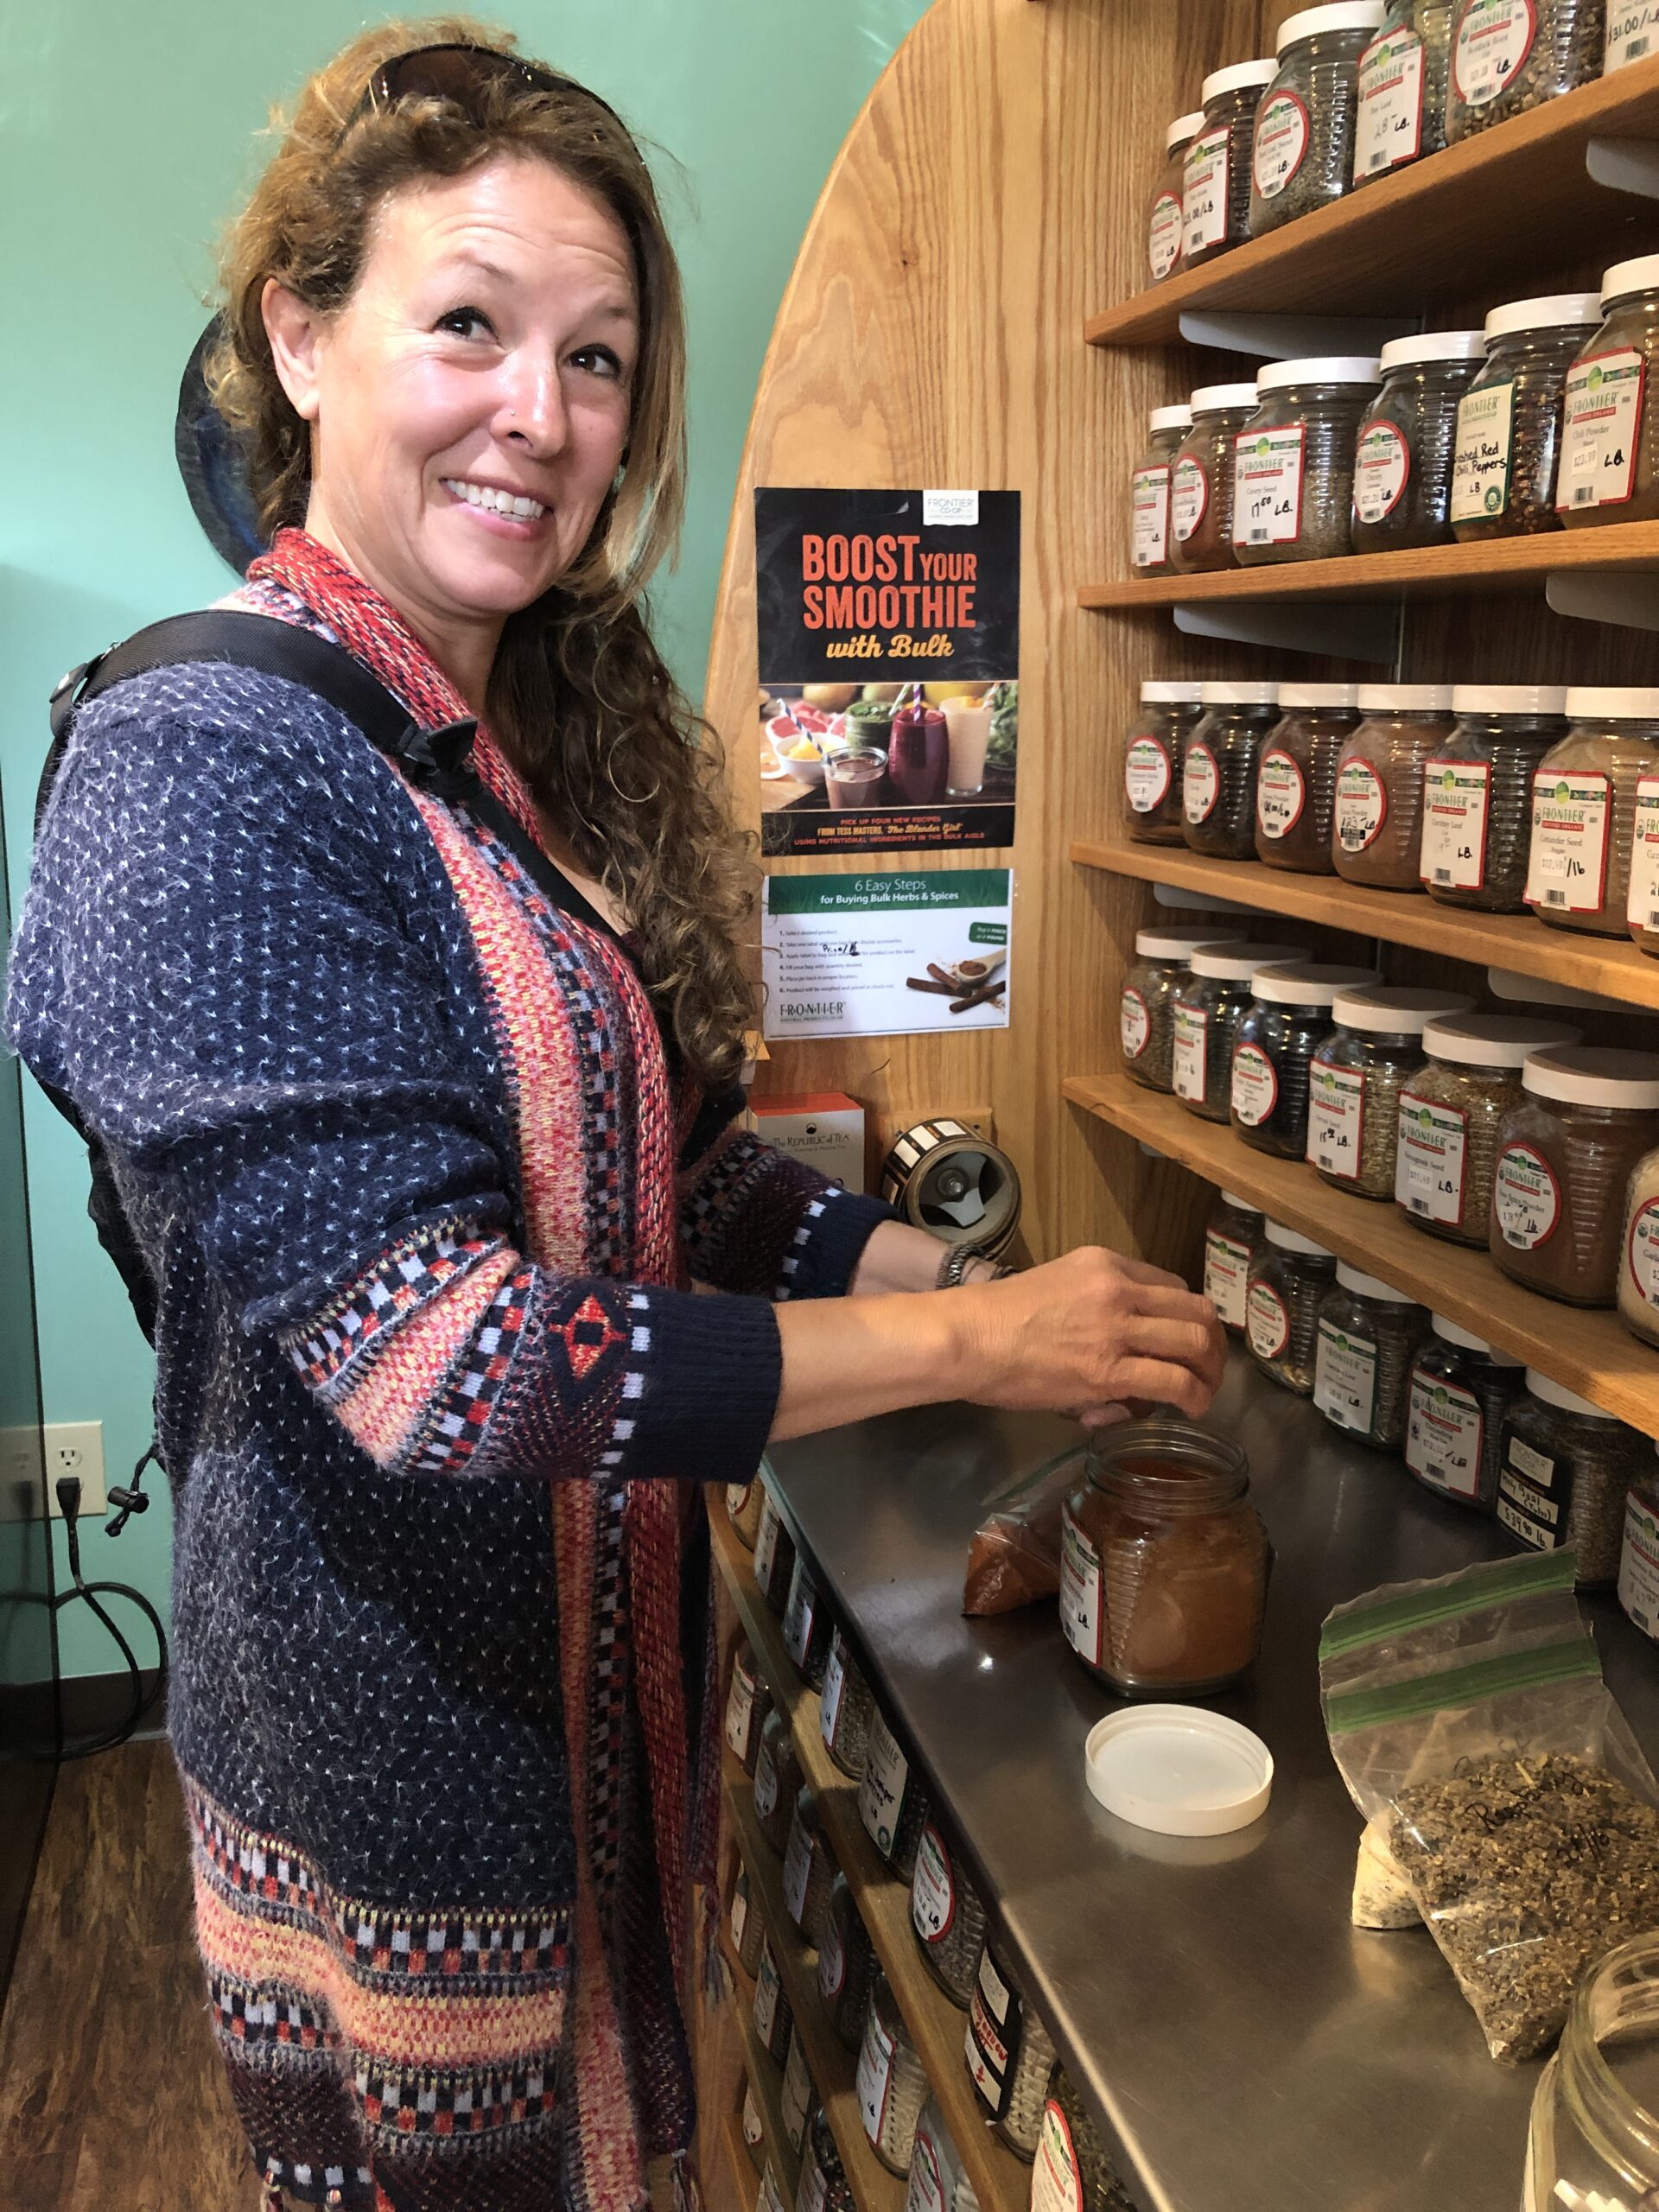 Frequent shopper Samantha shows how to select her own herbs and spices.